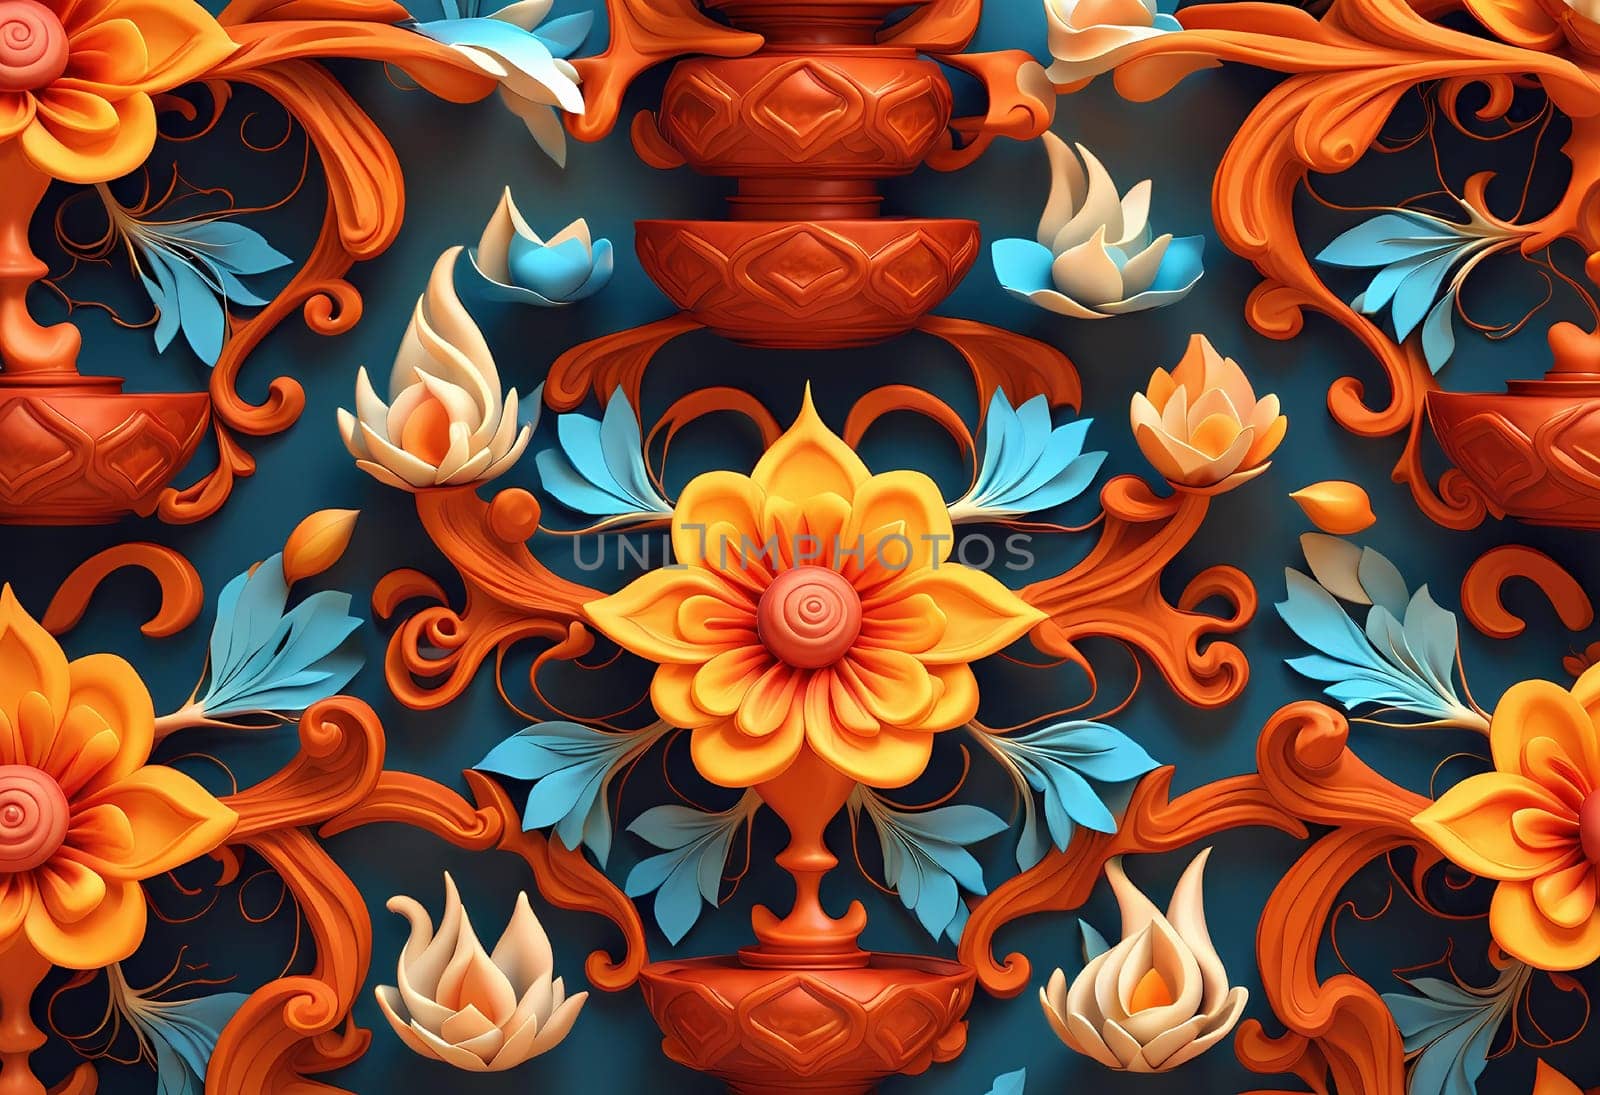 3D Abstract illustration in the style of Hindu faith. fire rituals pattern of flowers diversity of ideas on spirituality Generate AI